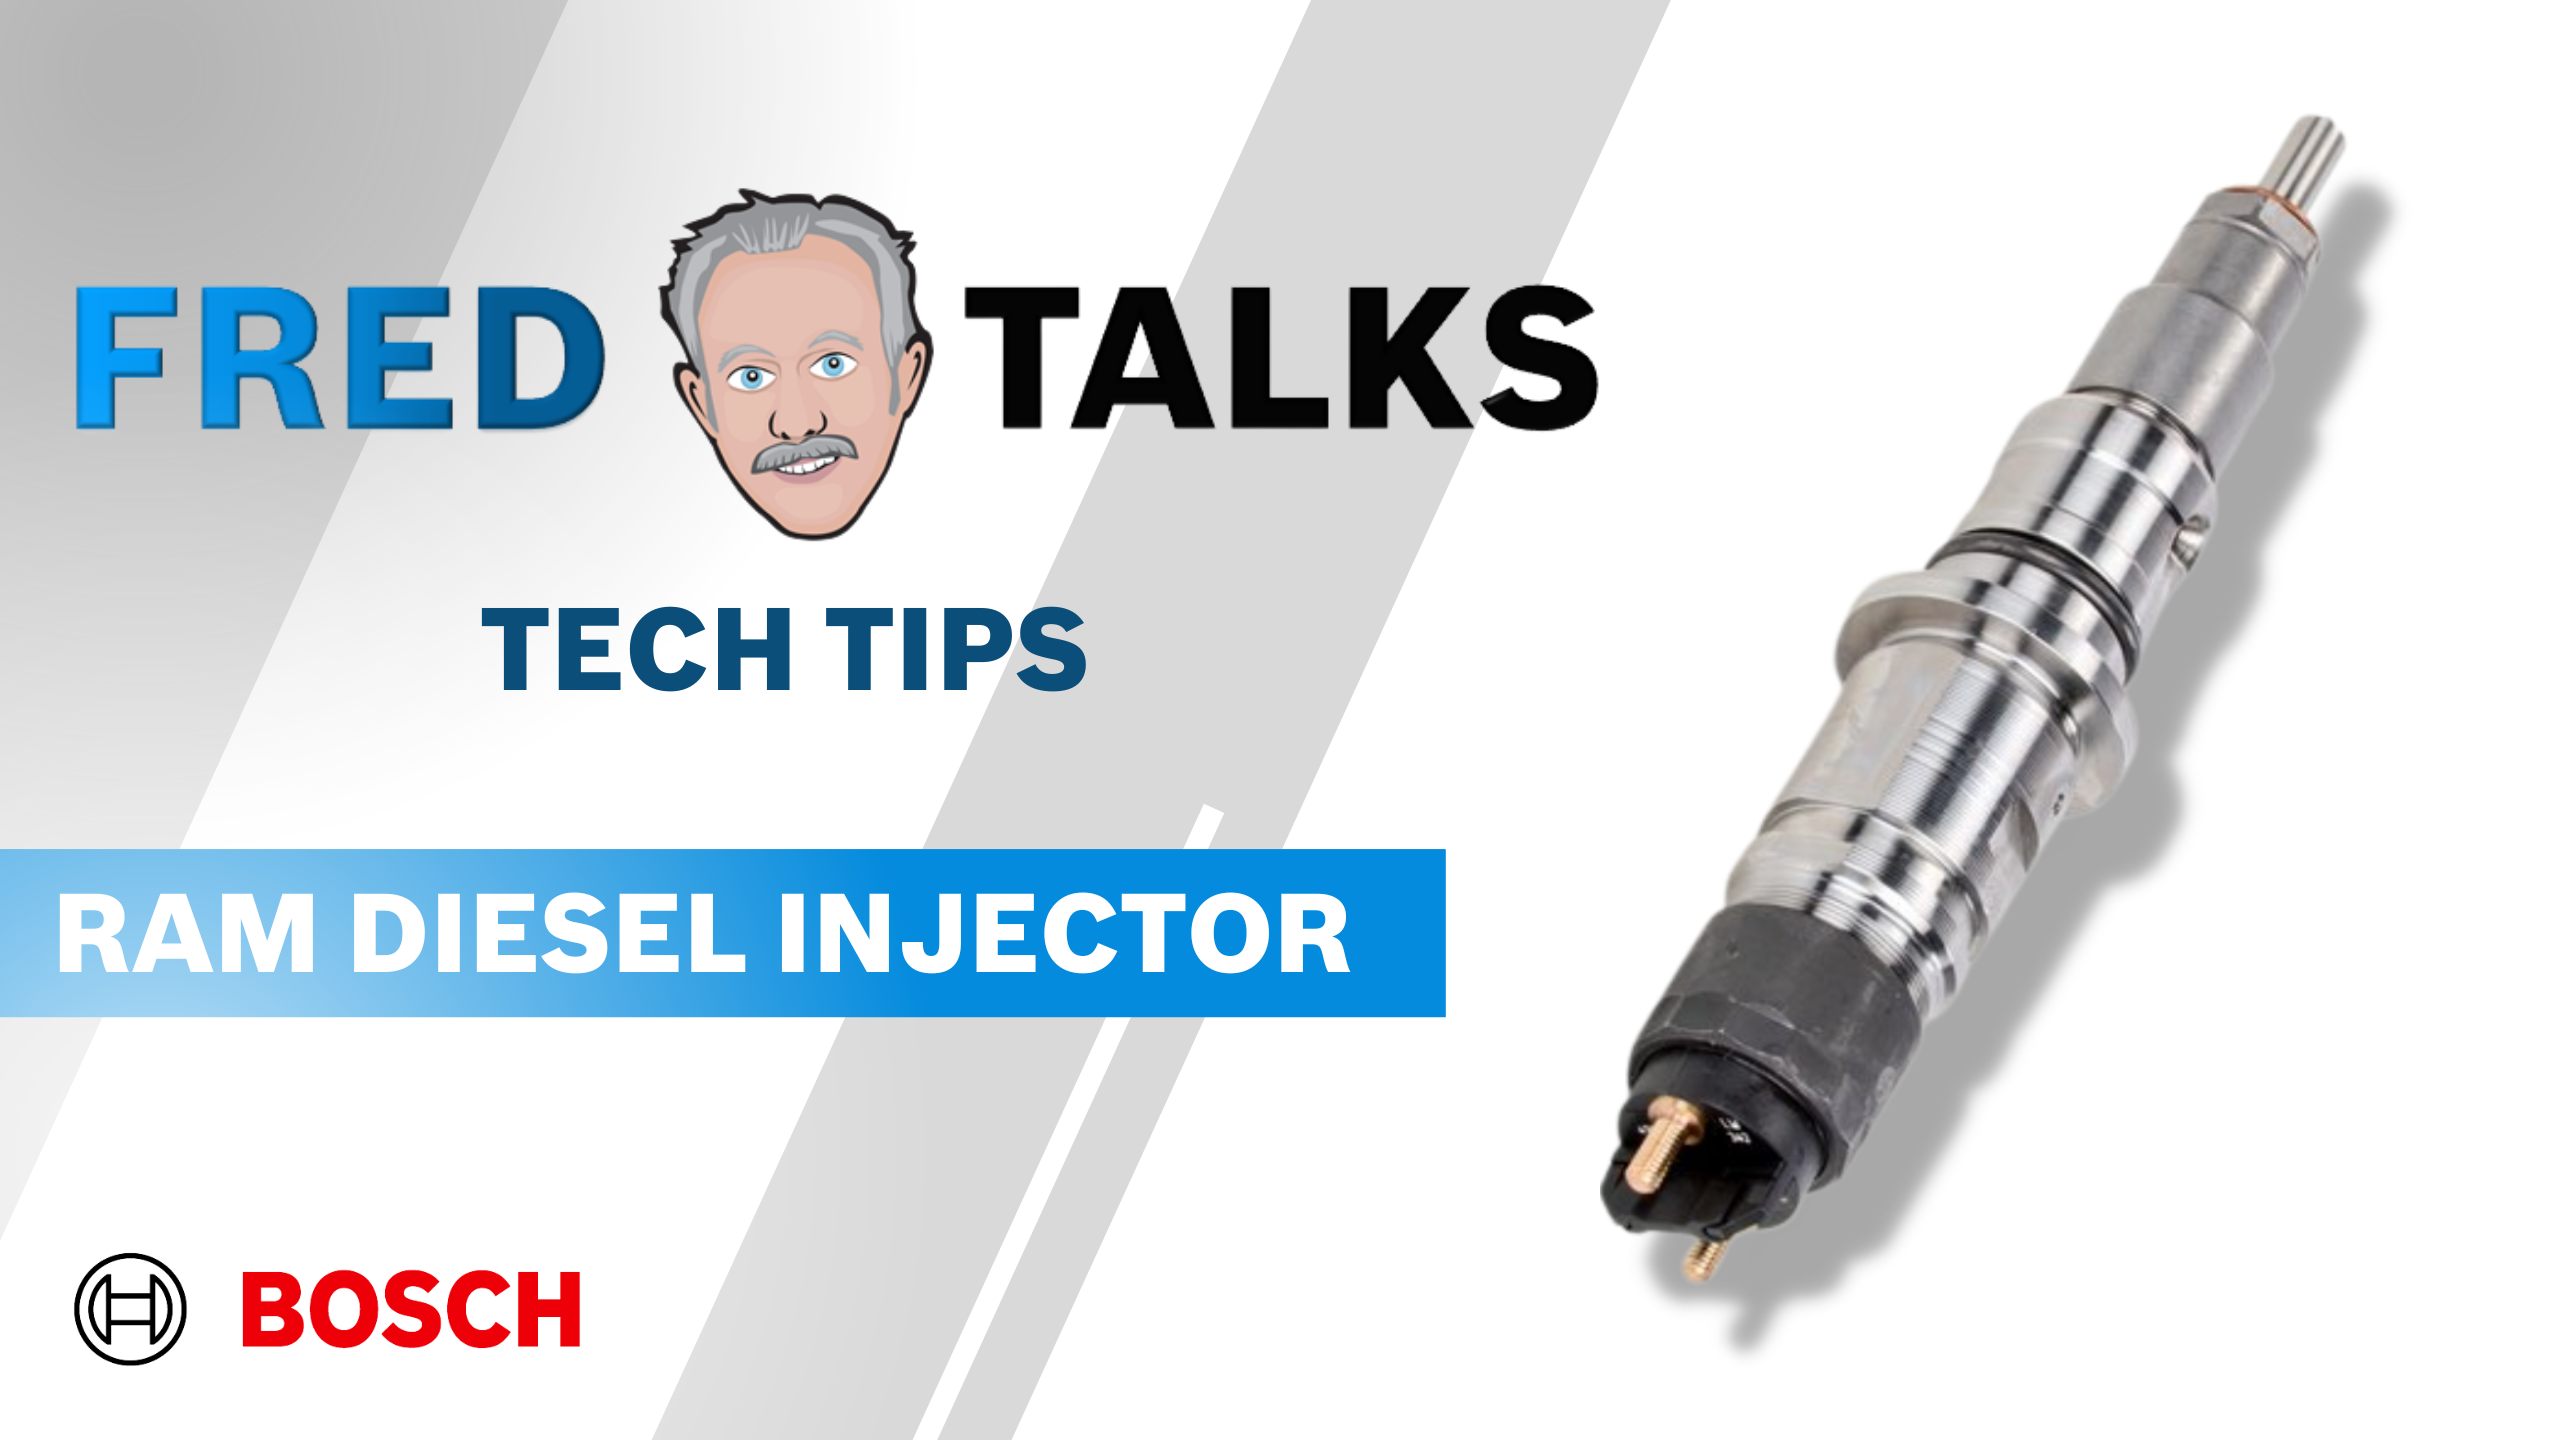 Fred Talks Tech Tip Ram Diesel Injector Shorting Out Image